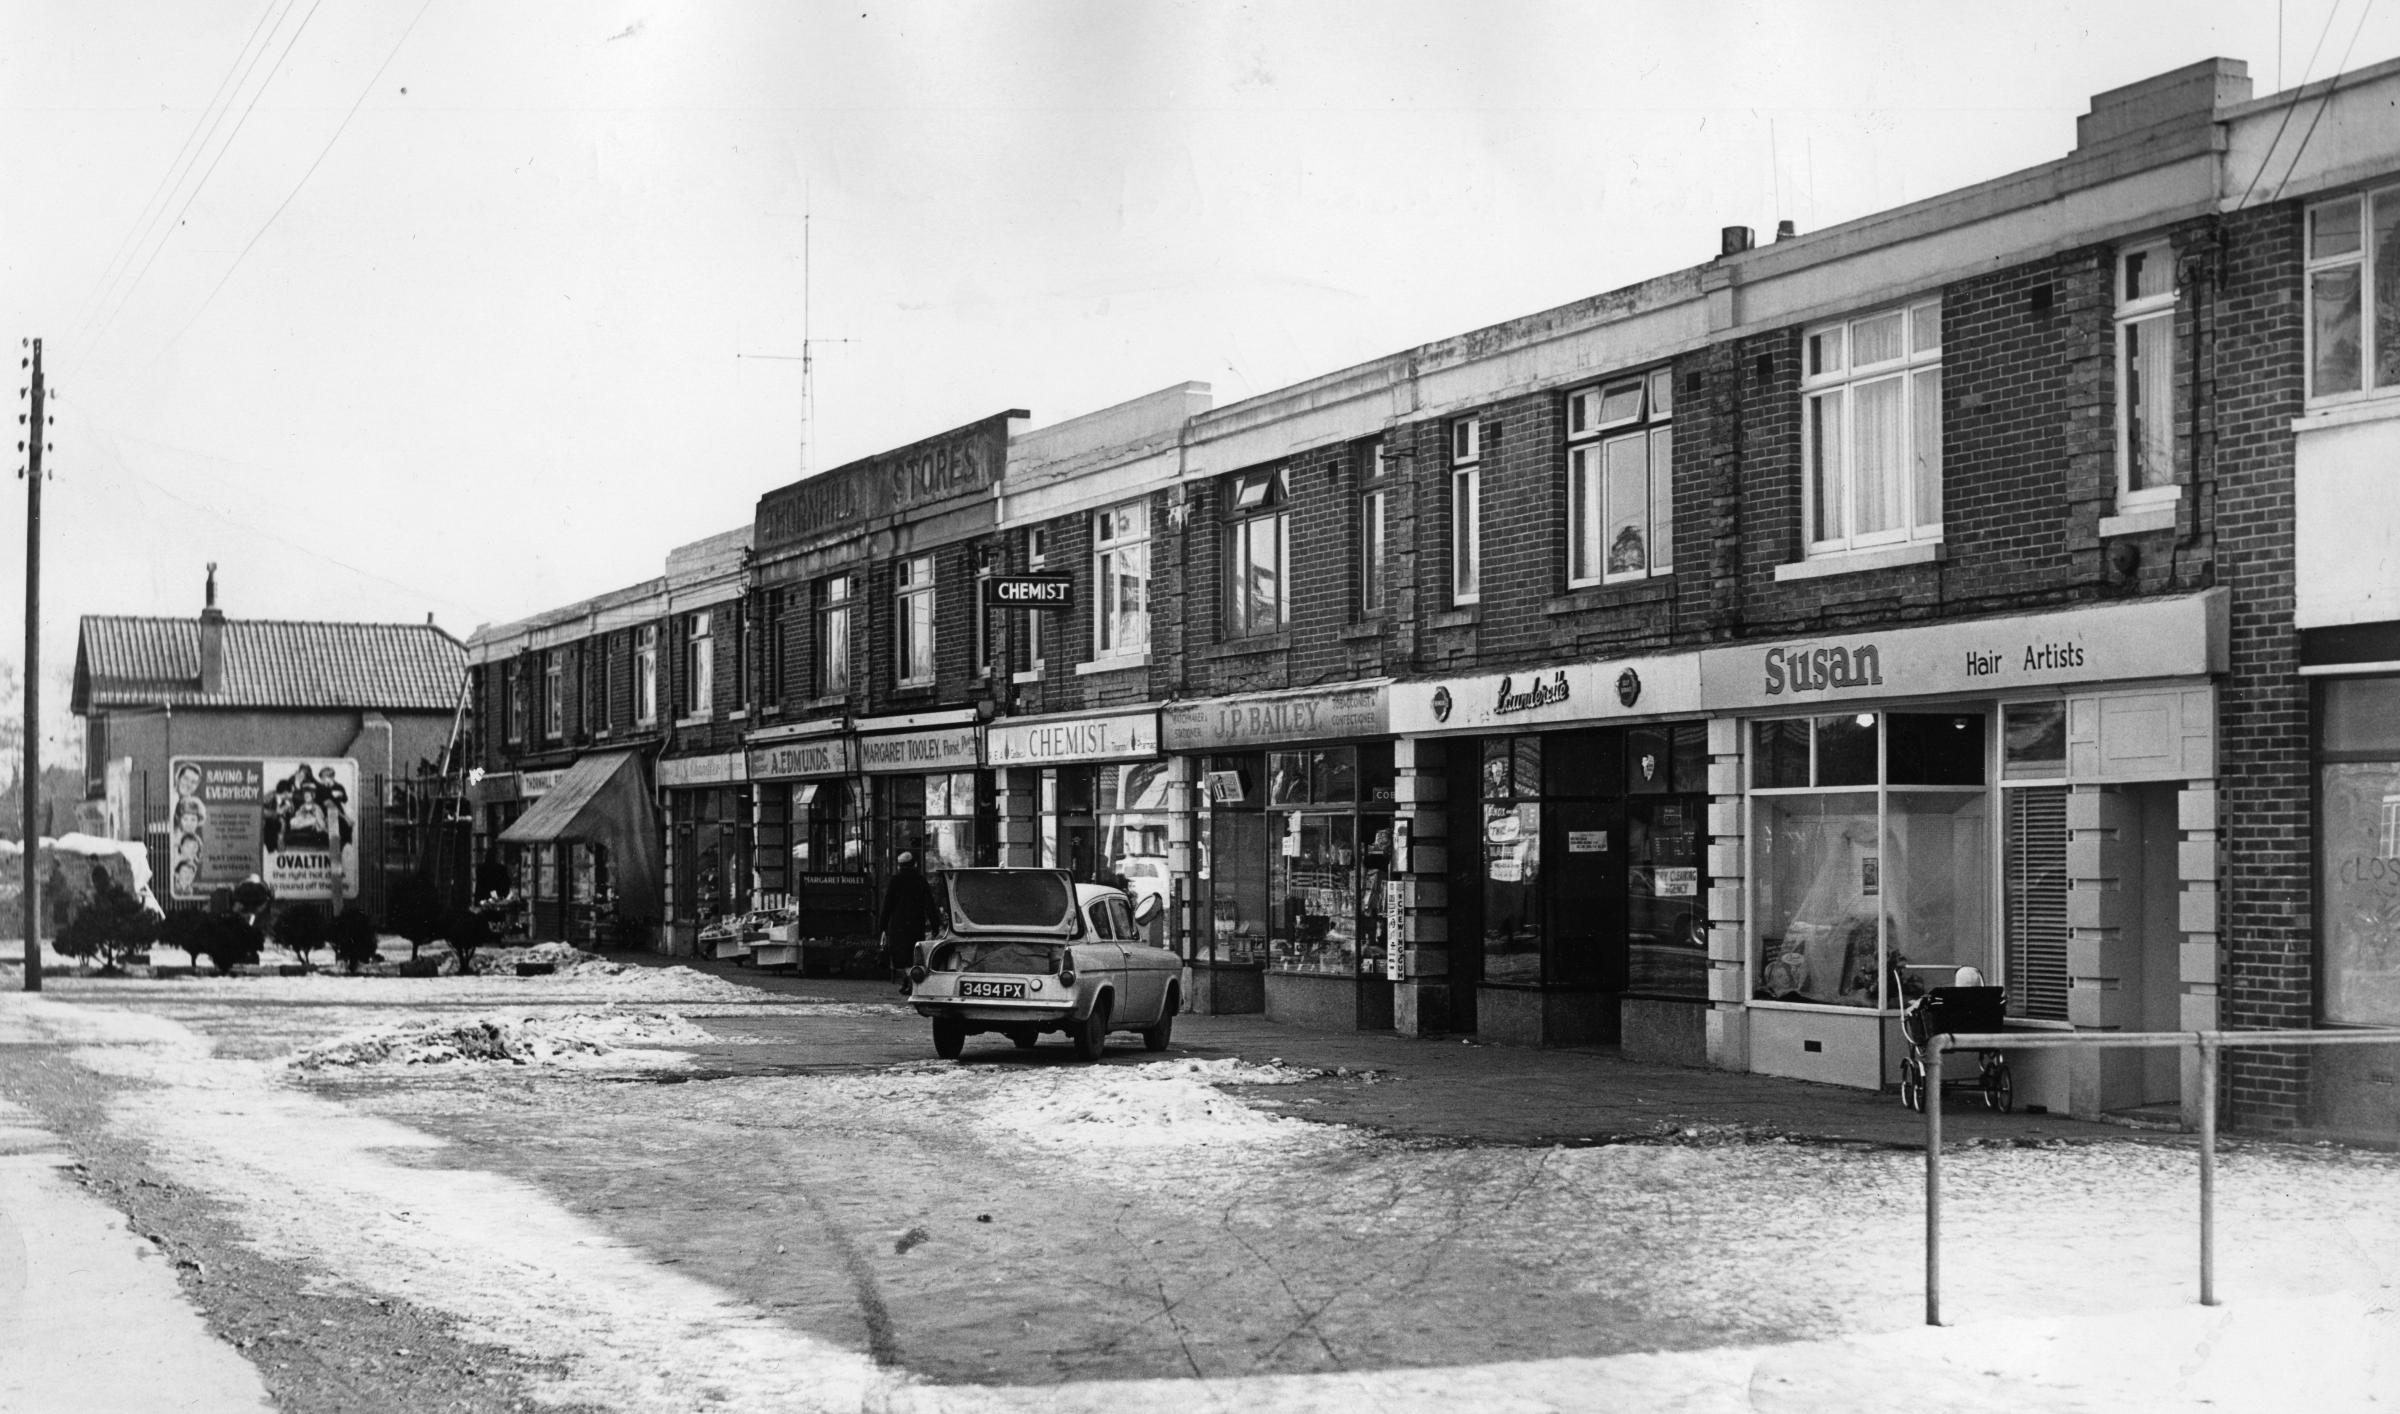 Thornhill Park Road shops. March 1, 1963. View from the Past. THE SOUTHERN DAILY ECHO ARCHIVES.